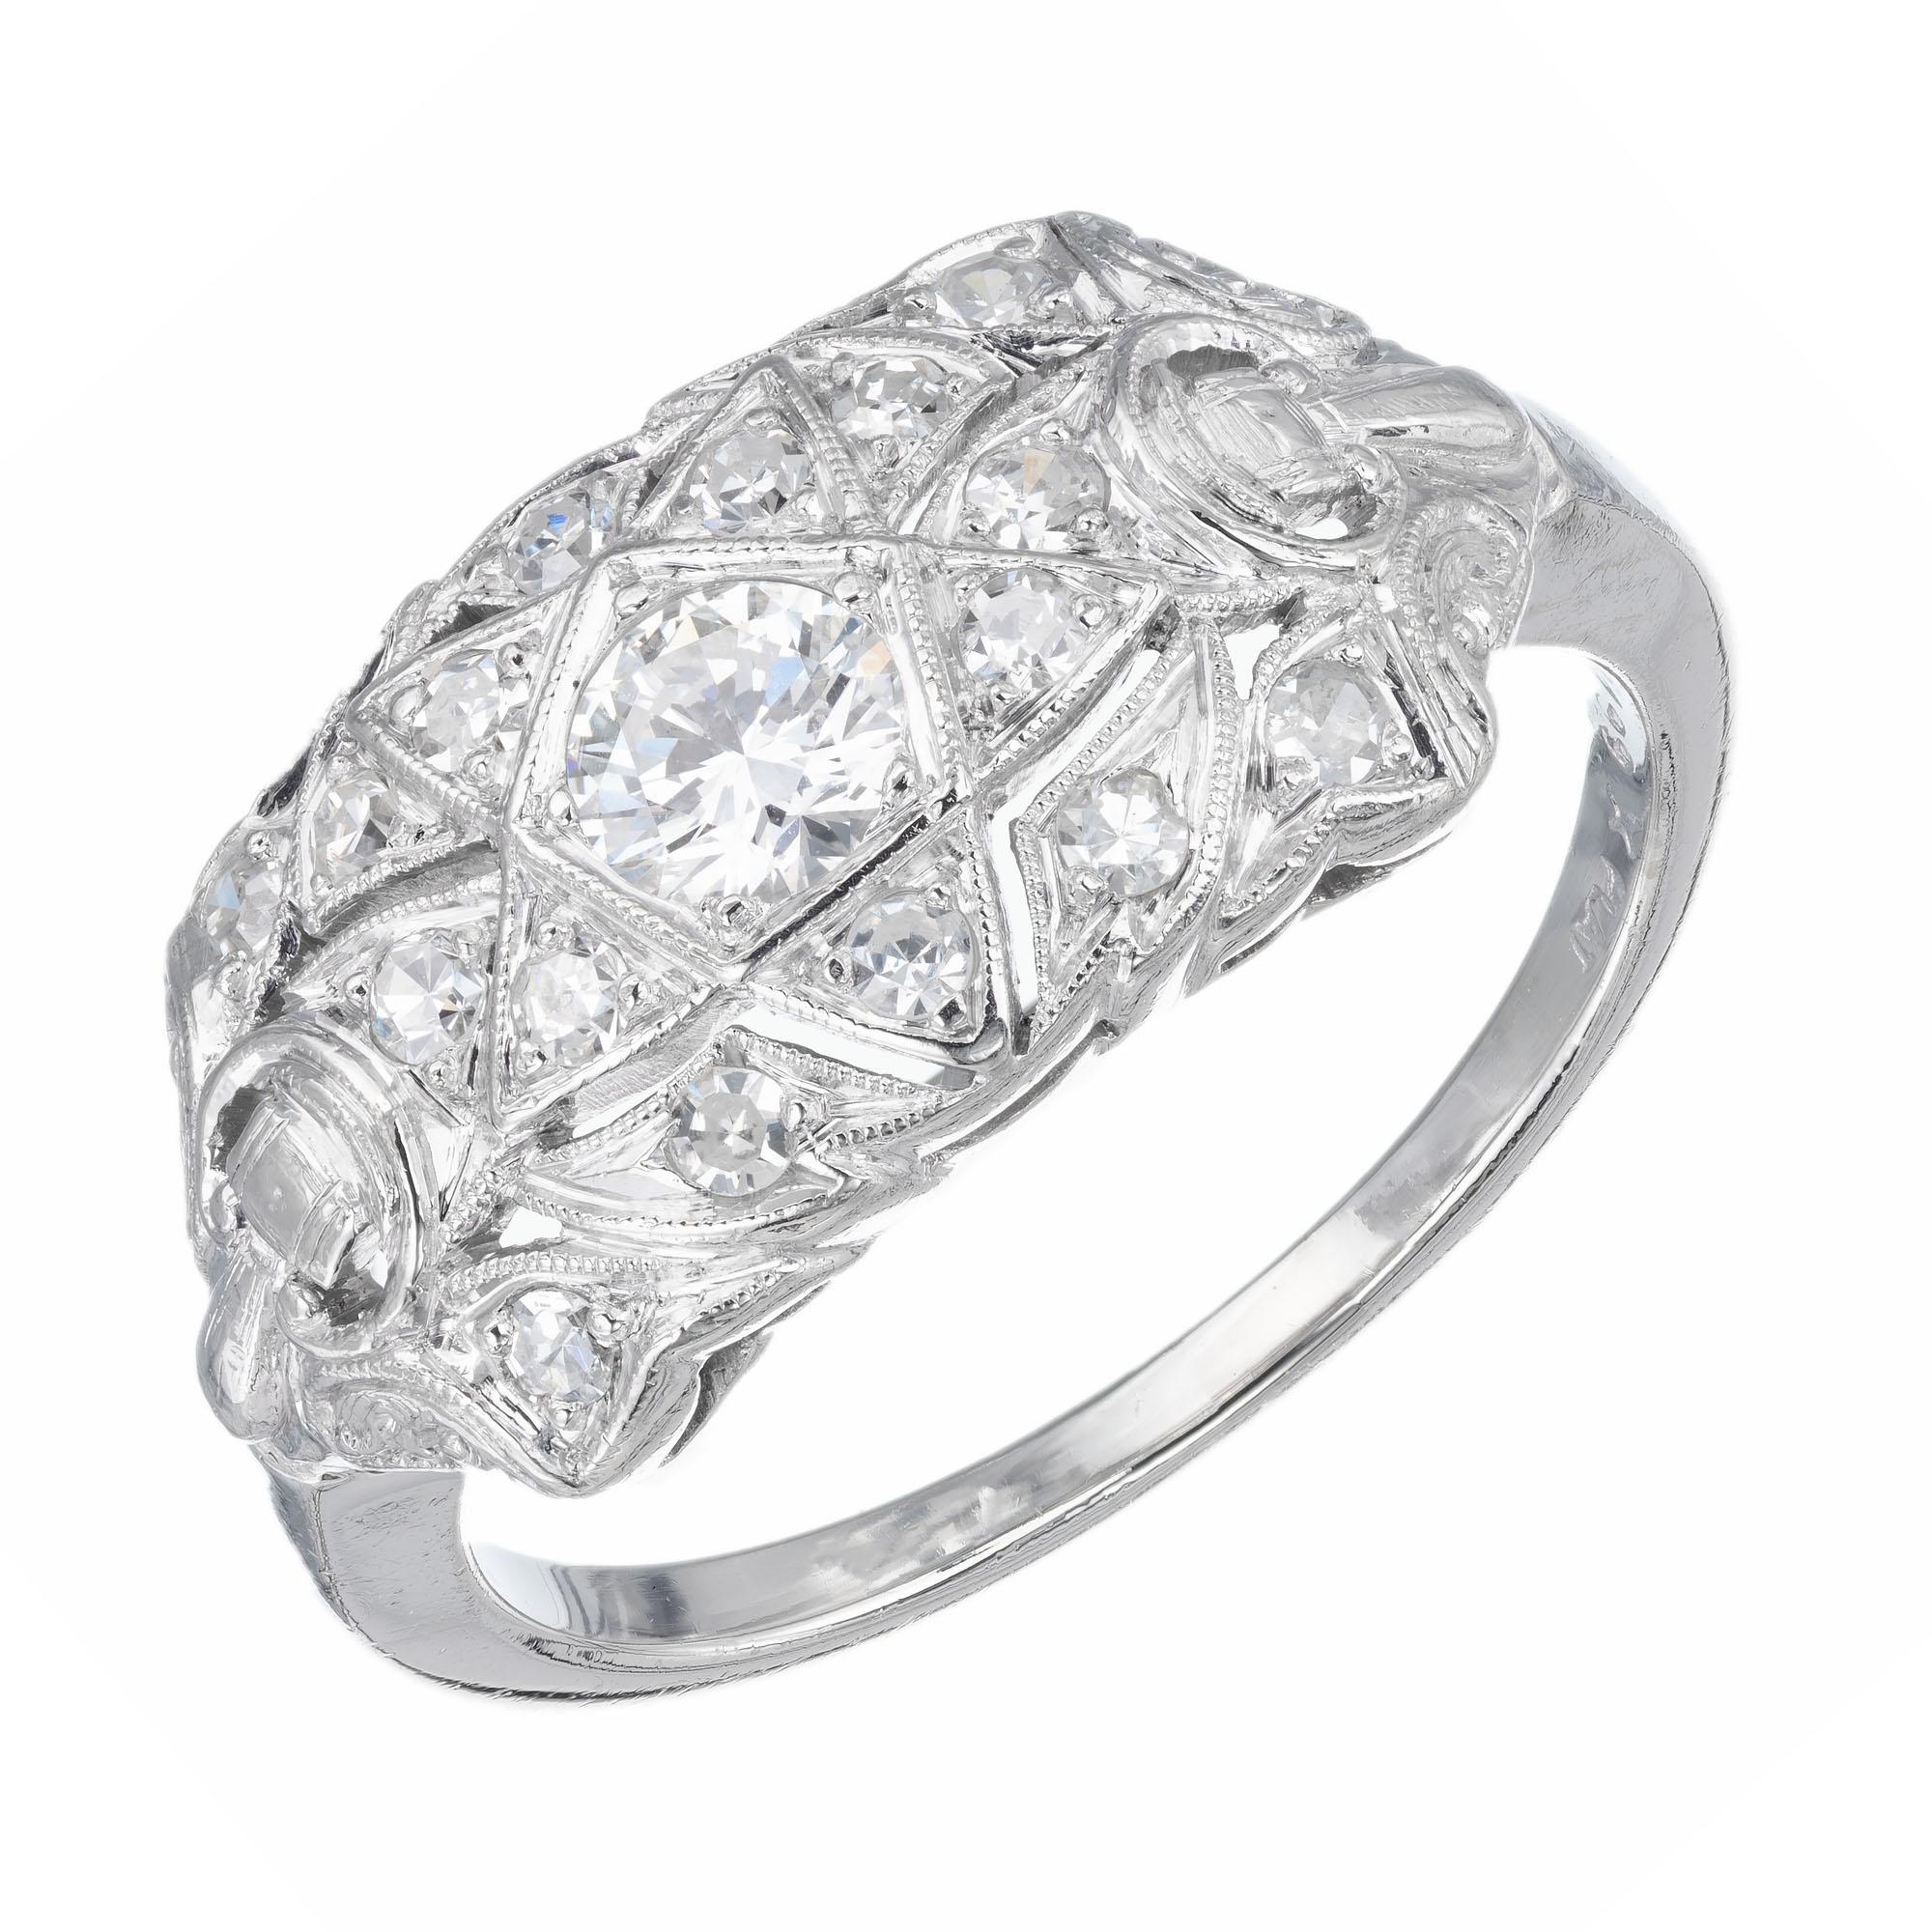 Original 1930's Diamond platinum ring with star design center and hand detailed and pierced top.
 
1 round brilliant cut diamond, approx. total weight .30cts, F, VS2
16 round diamonds, approx. total weight .28cts, F – G, VS1 – SI1
Size 7 and